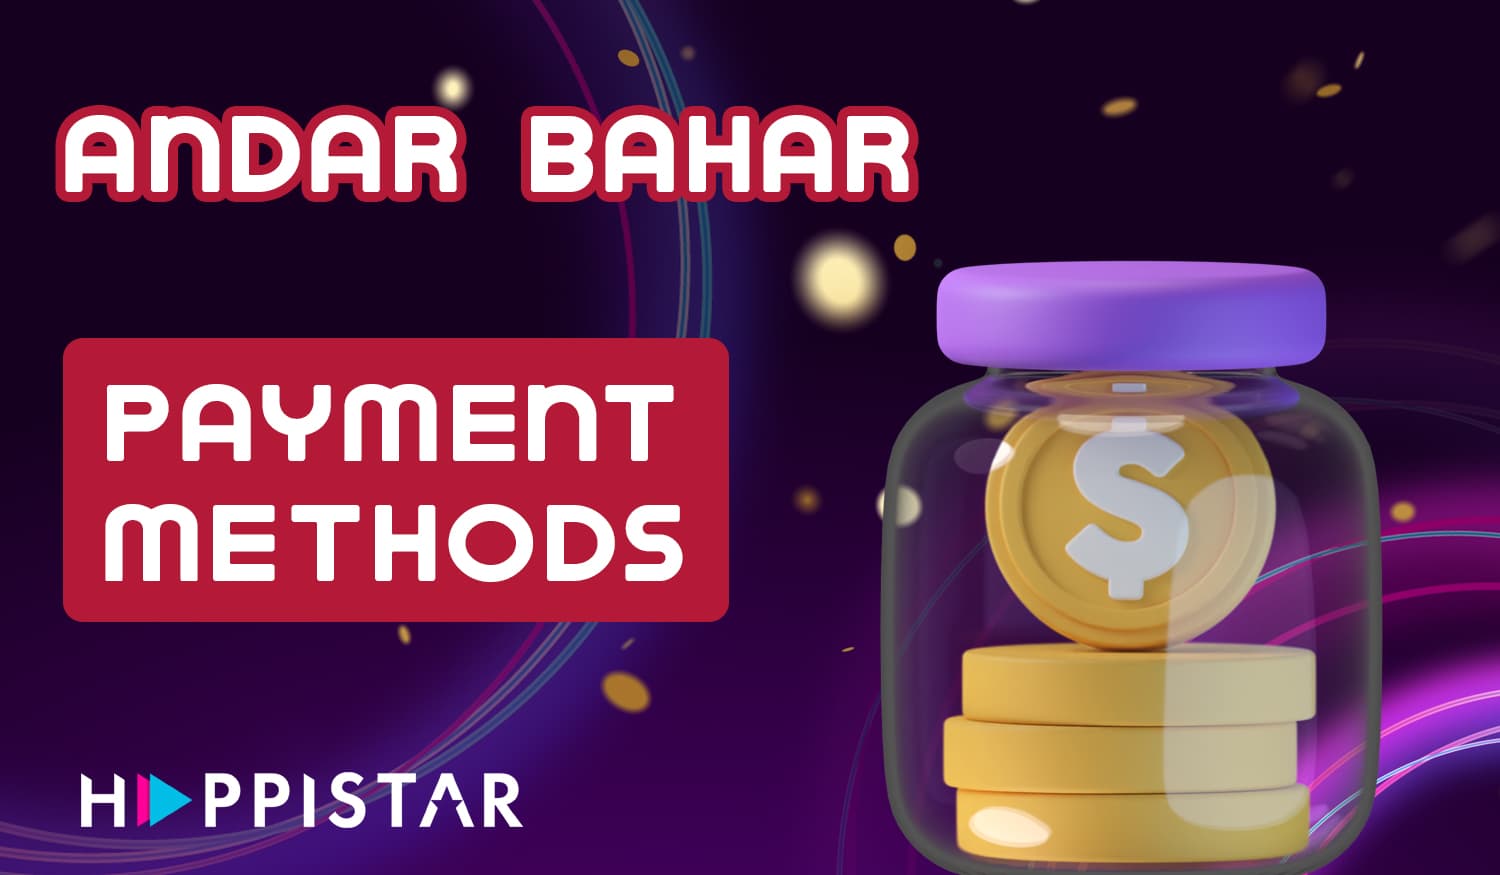 How to deposit and withdraw winnings from Happistarcasino india